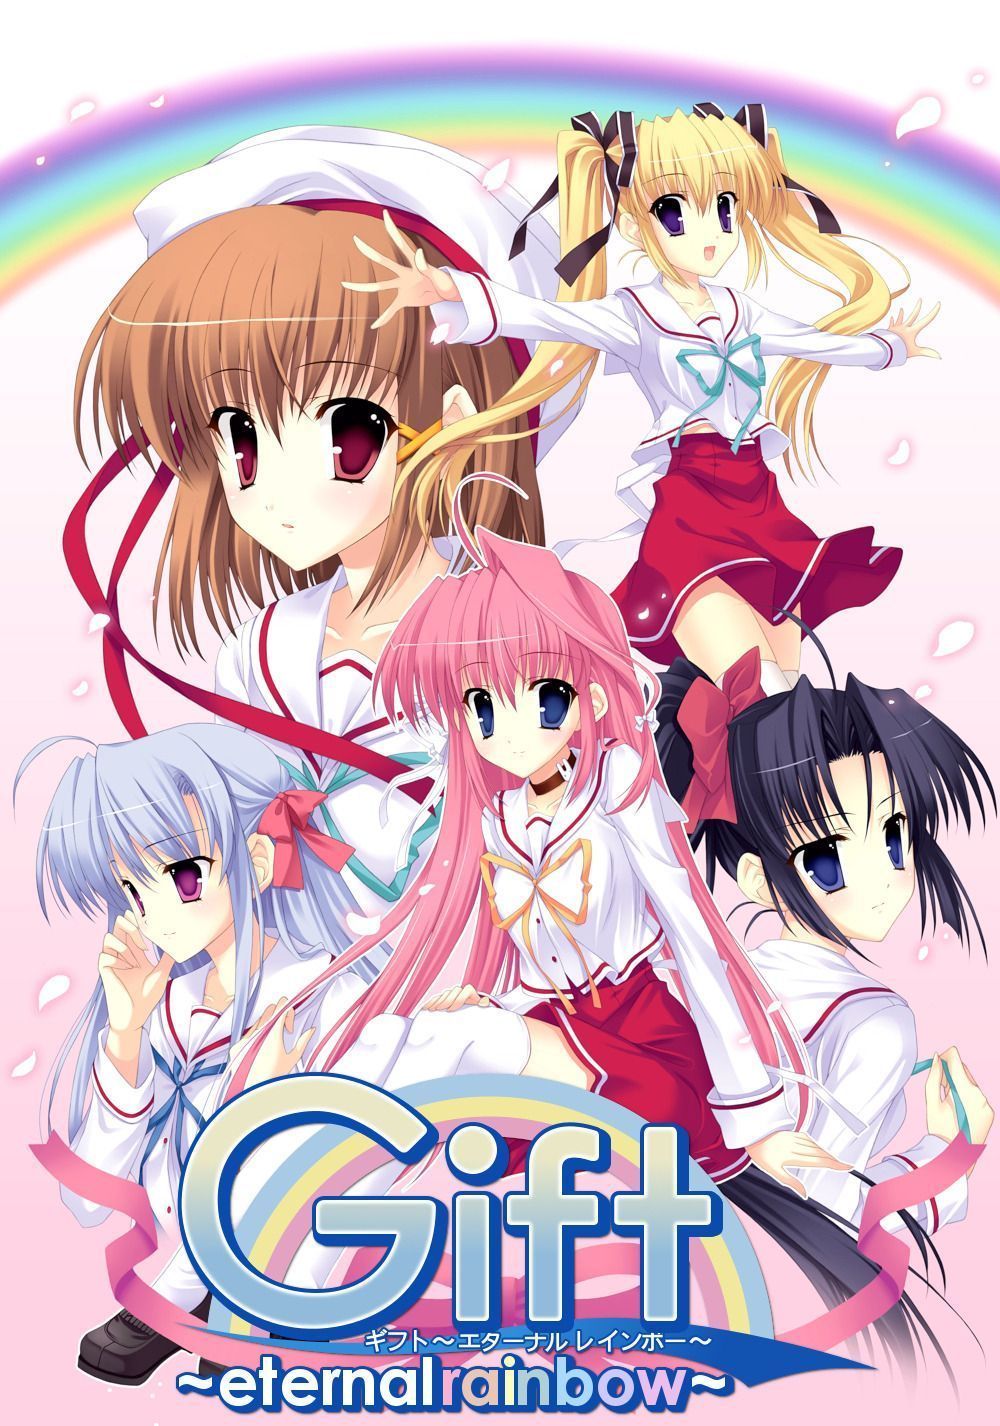 Gift - Eterna Rainbow - is a game about five girls who are sent to a magical school. - Animecore